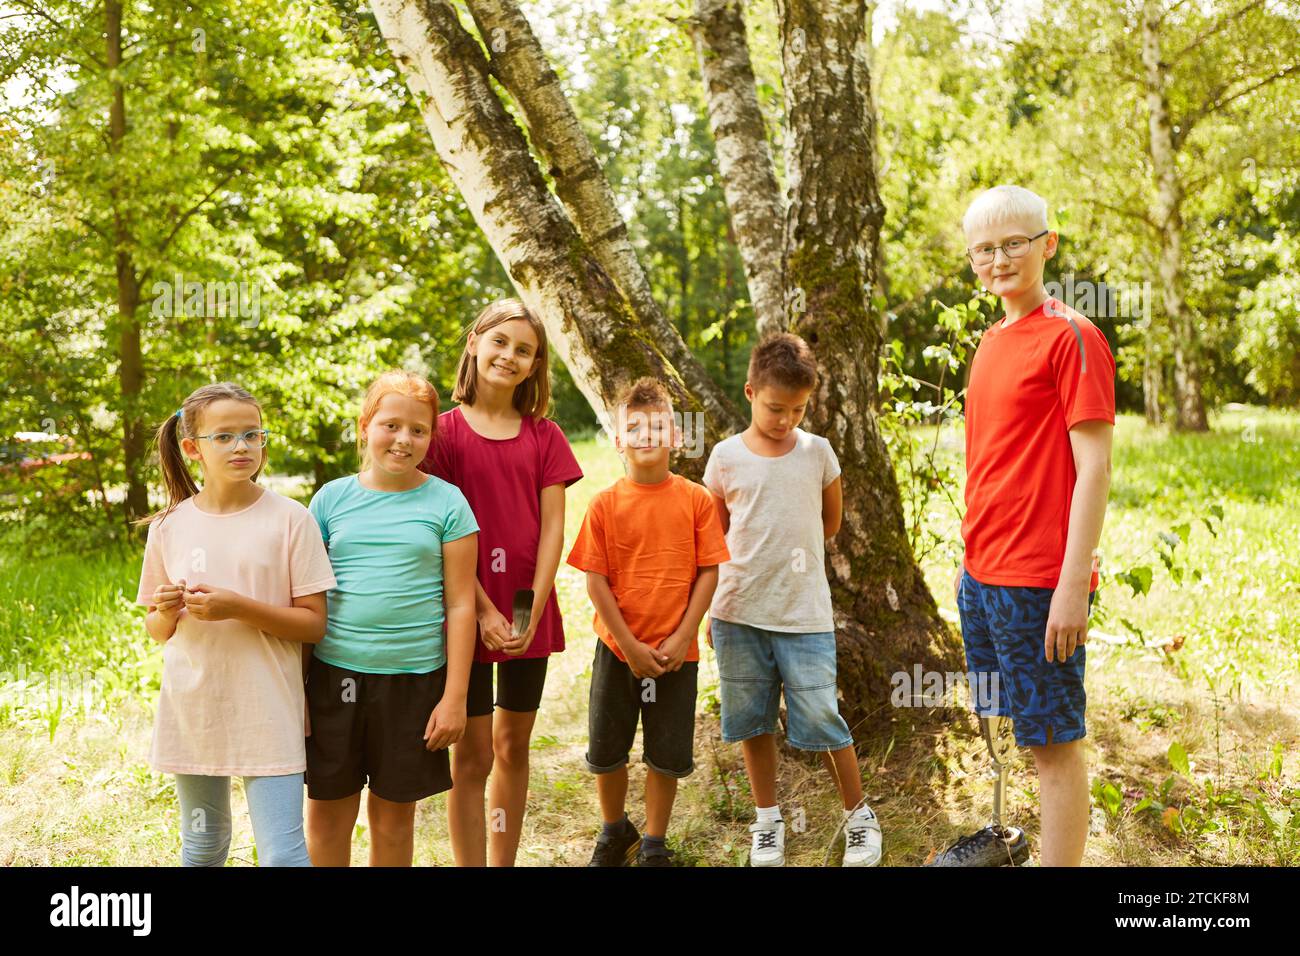 Group of happy children with handicapped boy standing in nature as inclusion concept Stock Photo